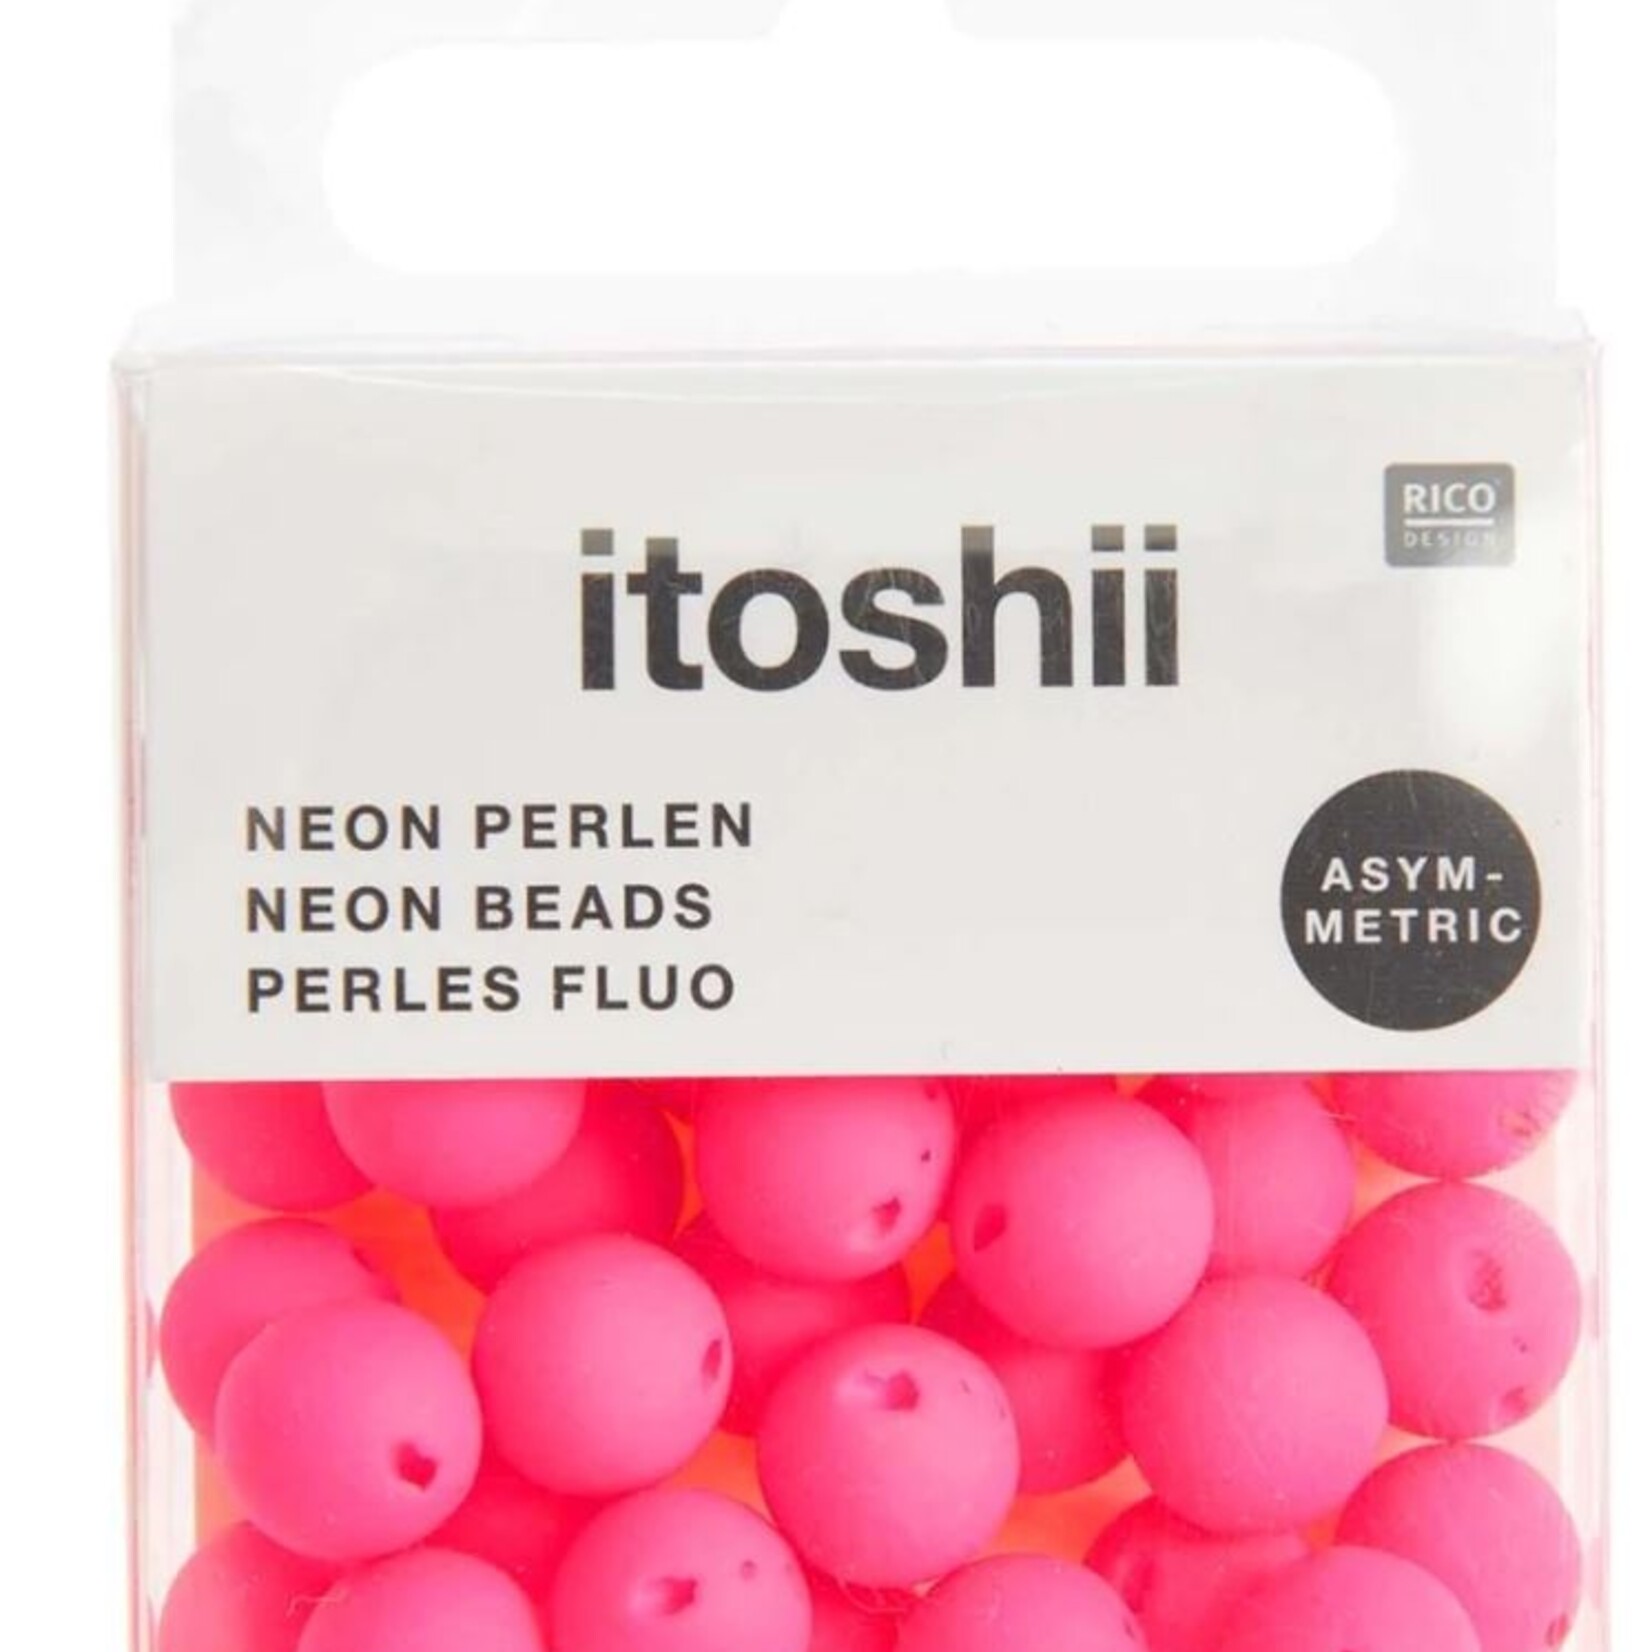 RICO Plastic beads, neon pink, asymmetric, 40 pcs, Ã˜ 8 mm, Special perforation on top